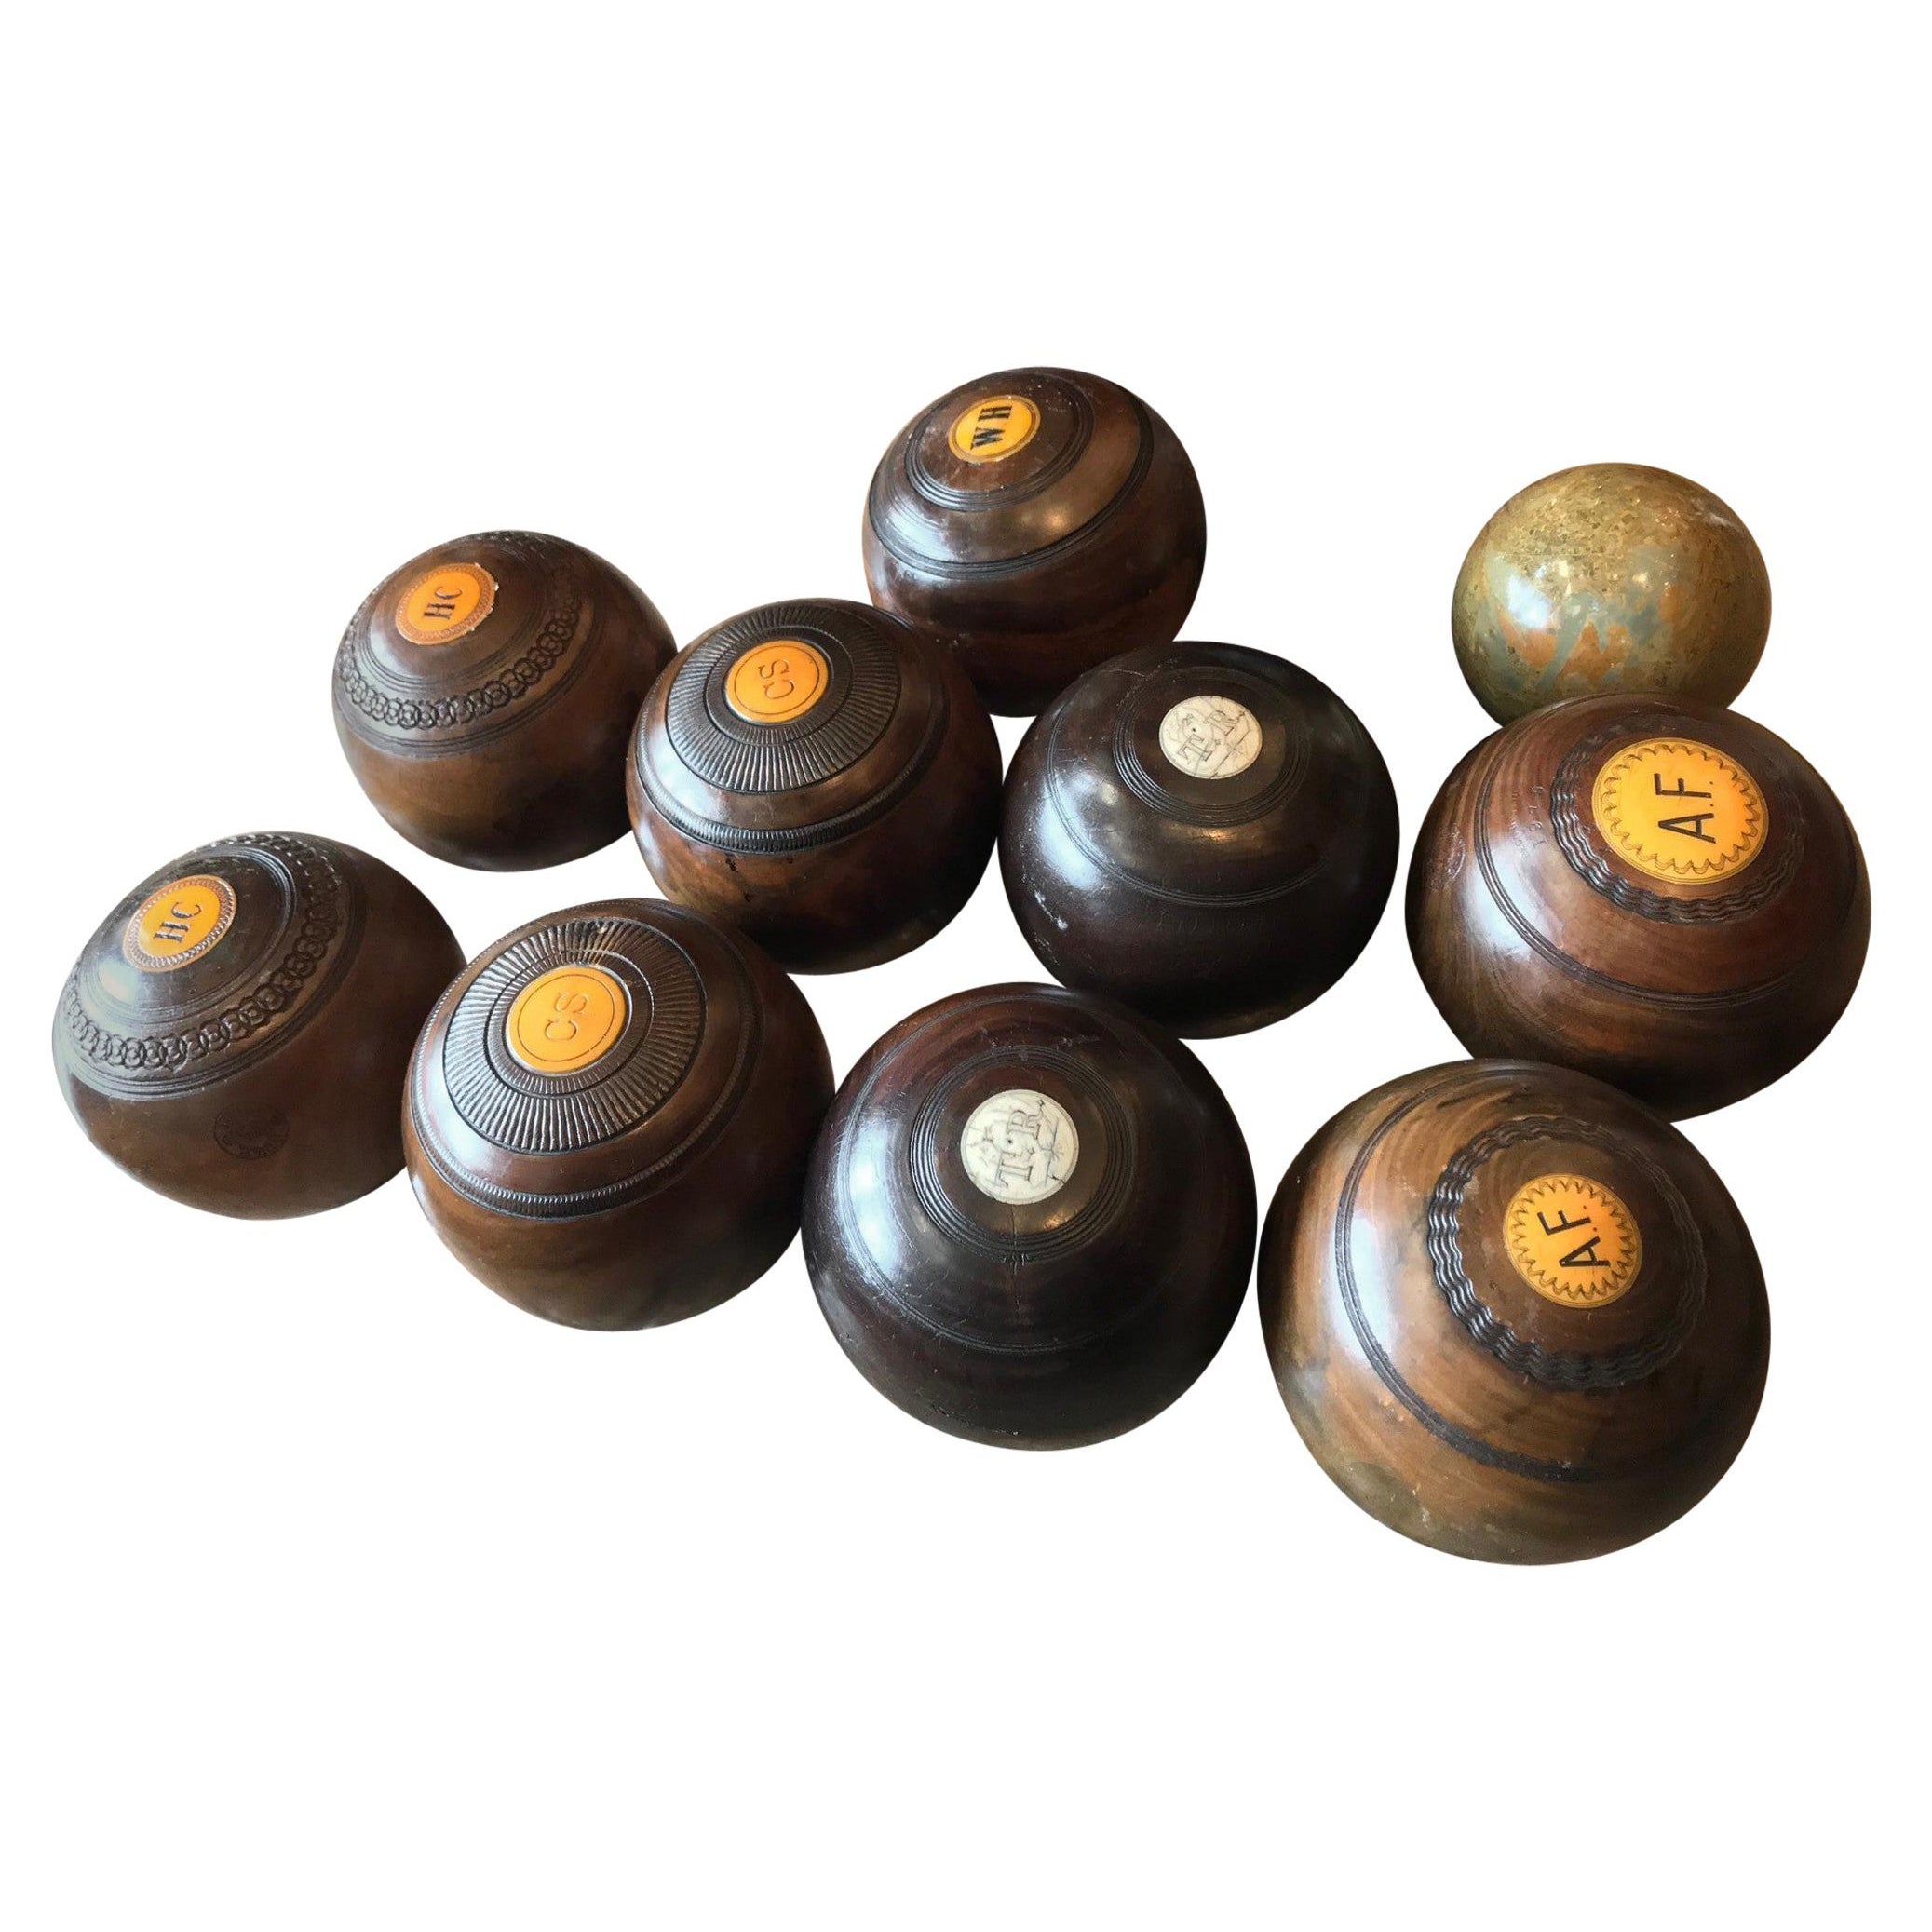 10 Carpet Lawn Bowling Hand Carved Wood & Stone Balls Antique Office Gift Idea